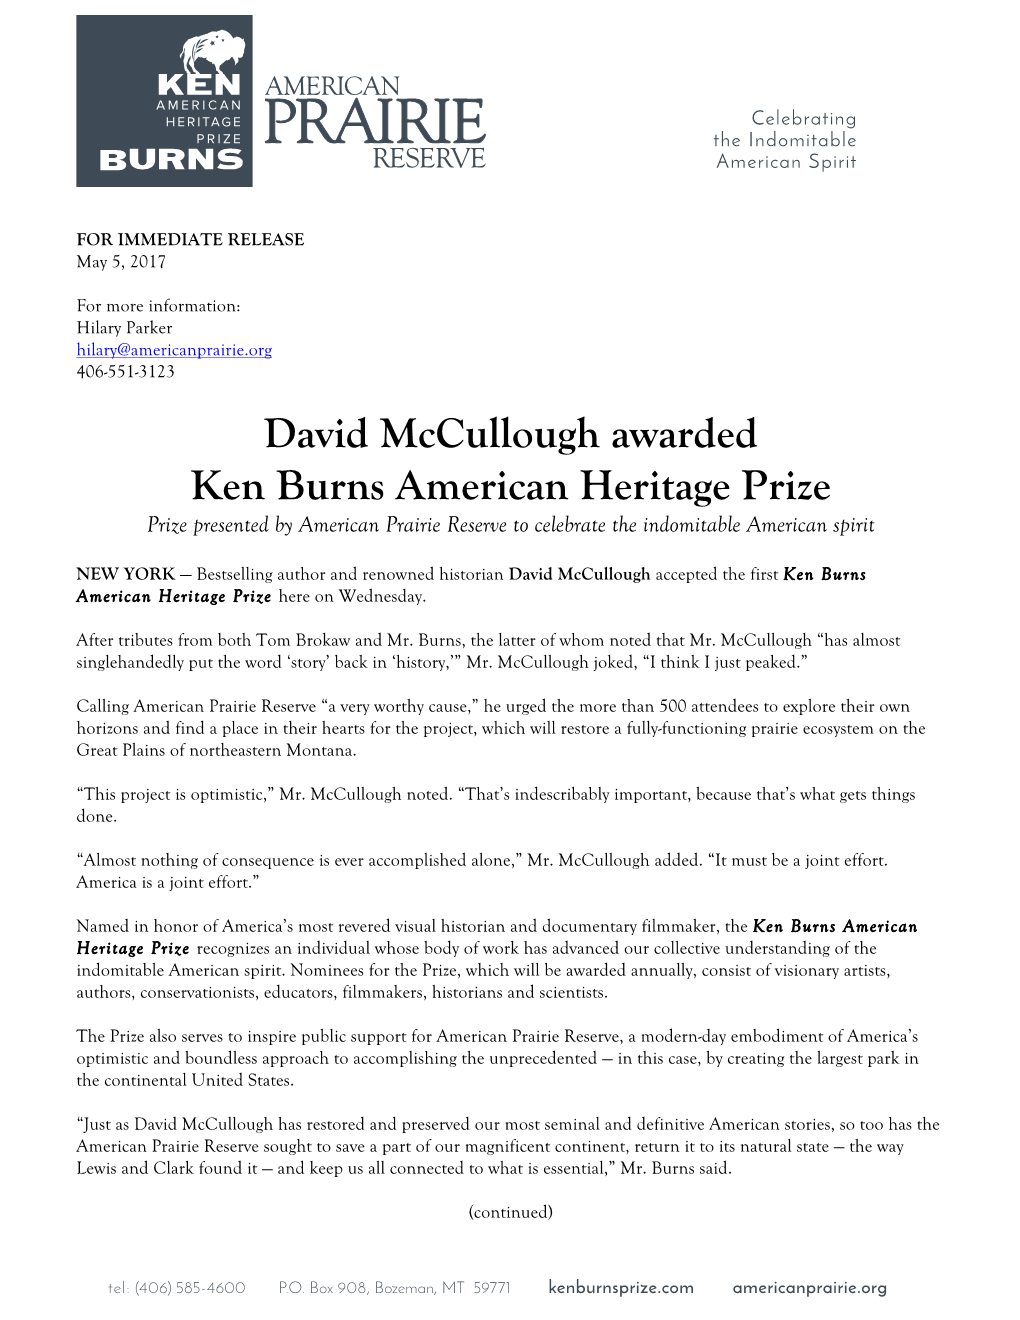 David Mccullough Awarded Ken Burns American Heritage Prize Prize Presented by American Prairie Reserve to Celebrate the Indomitable American Spirit